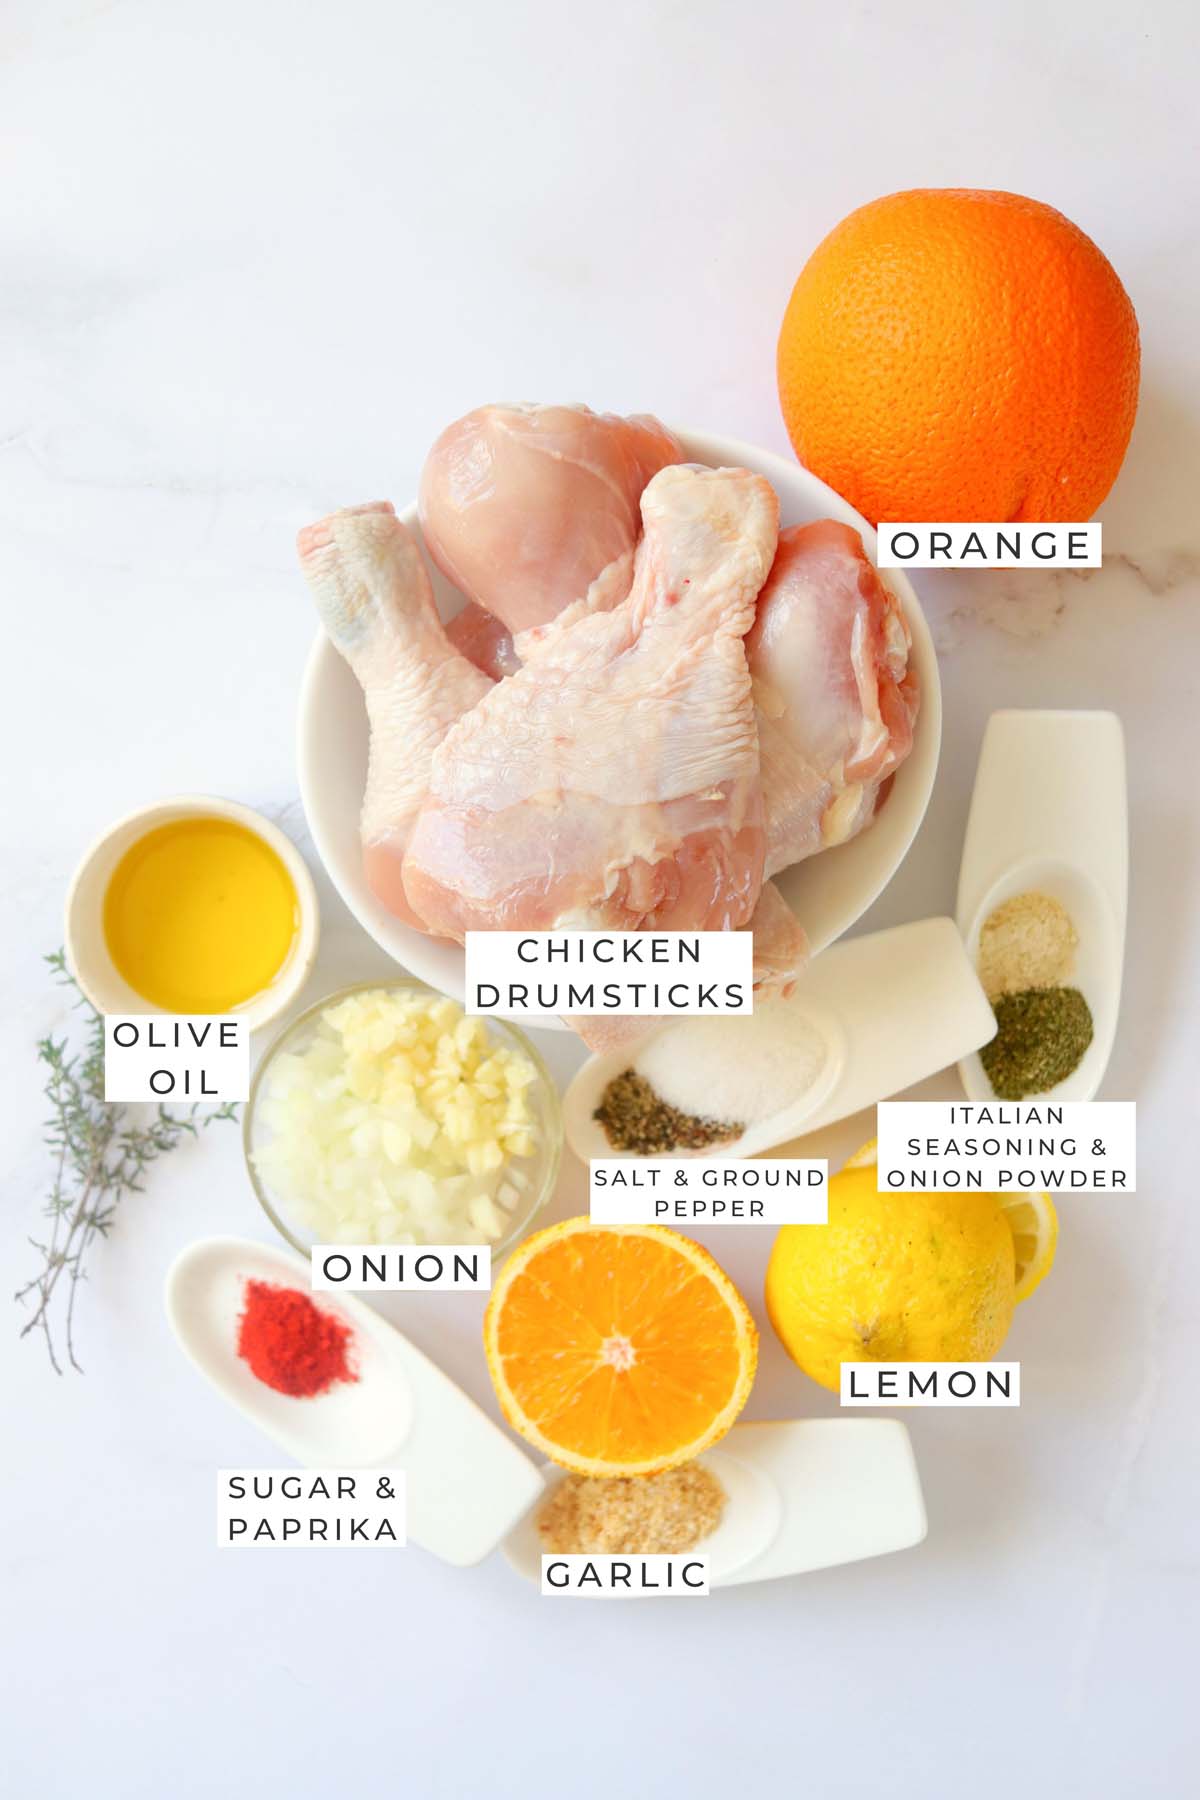 Labeled ingredients for the roasted chicken.